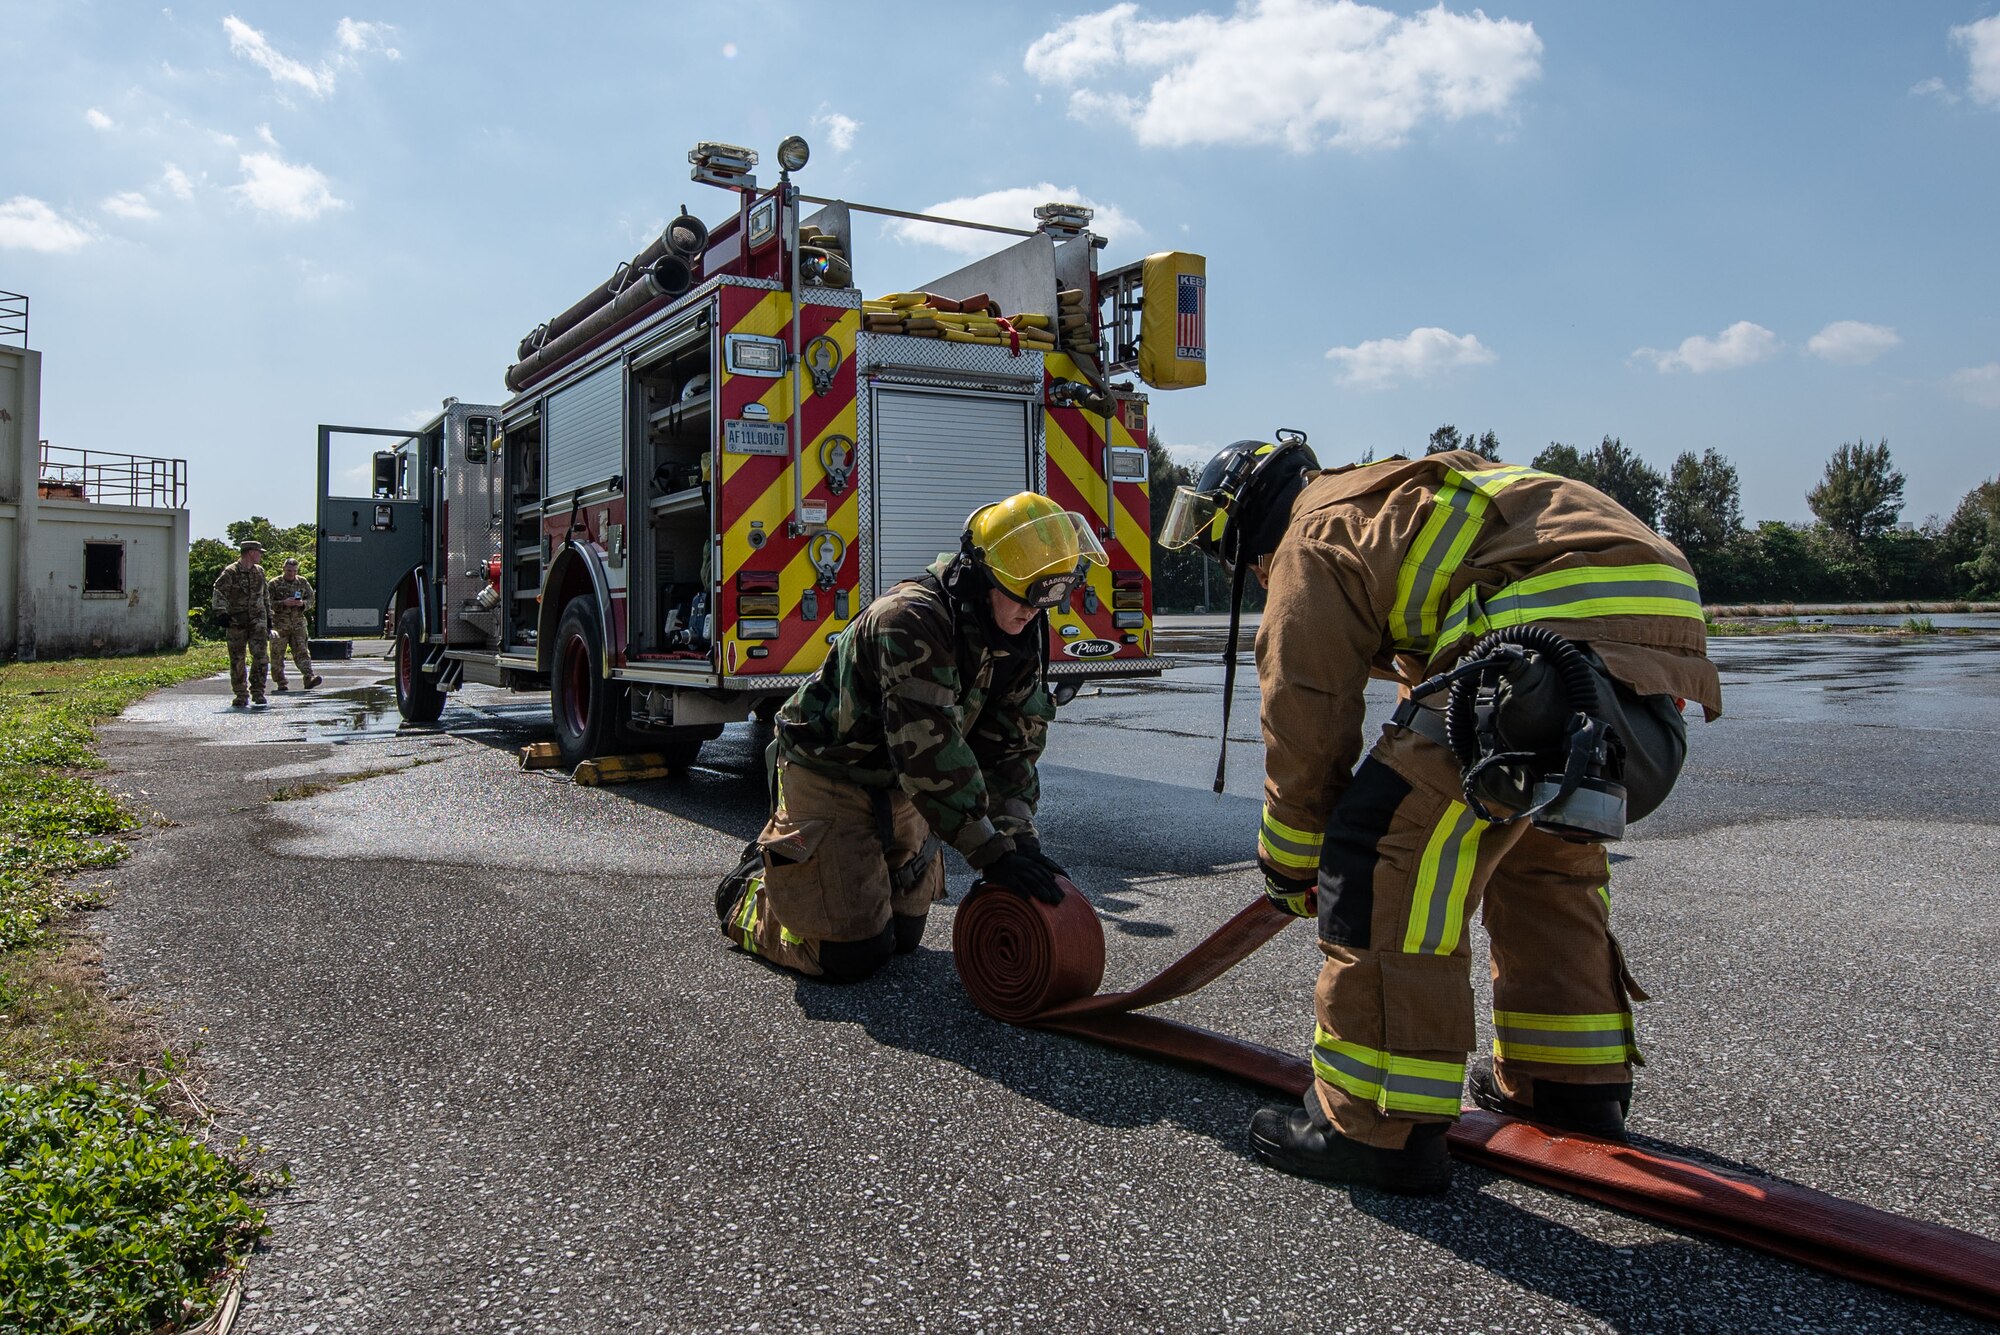 Firefighters roll a hose.